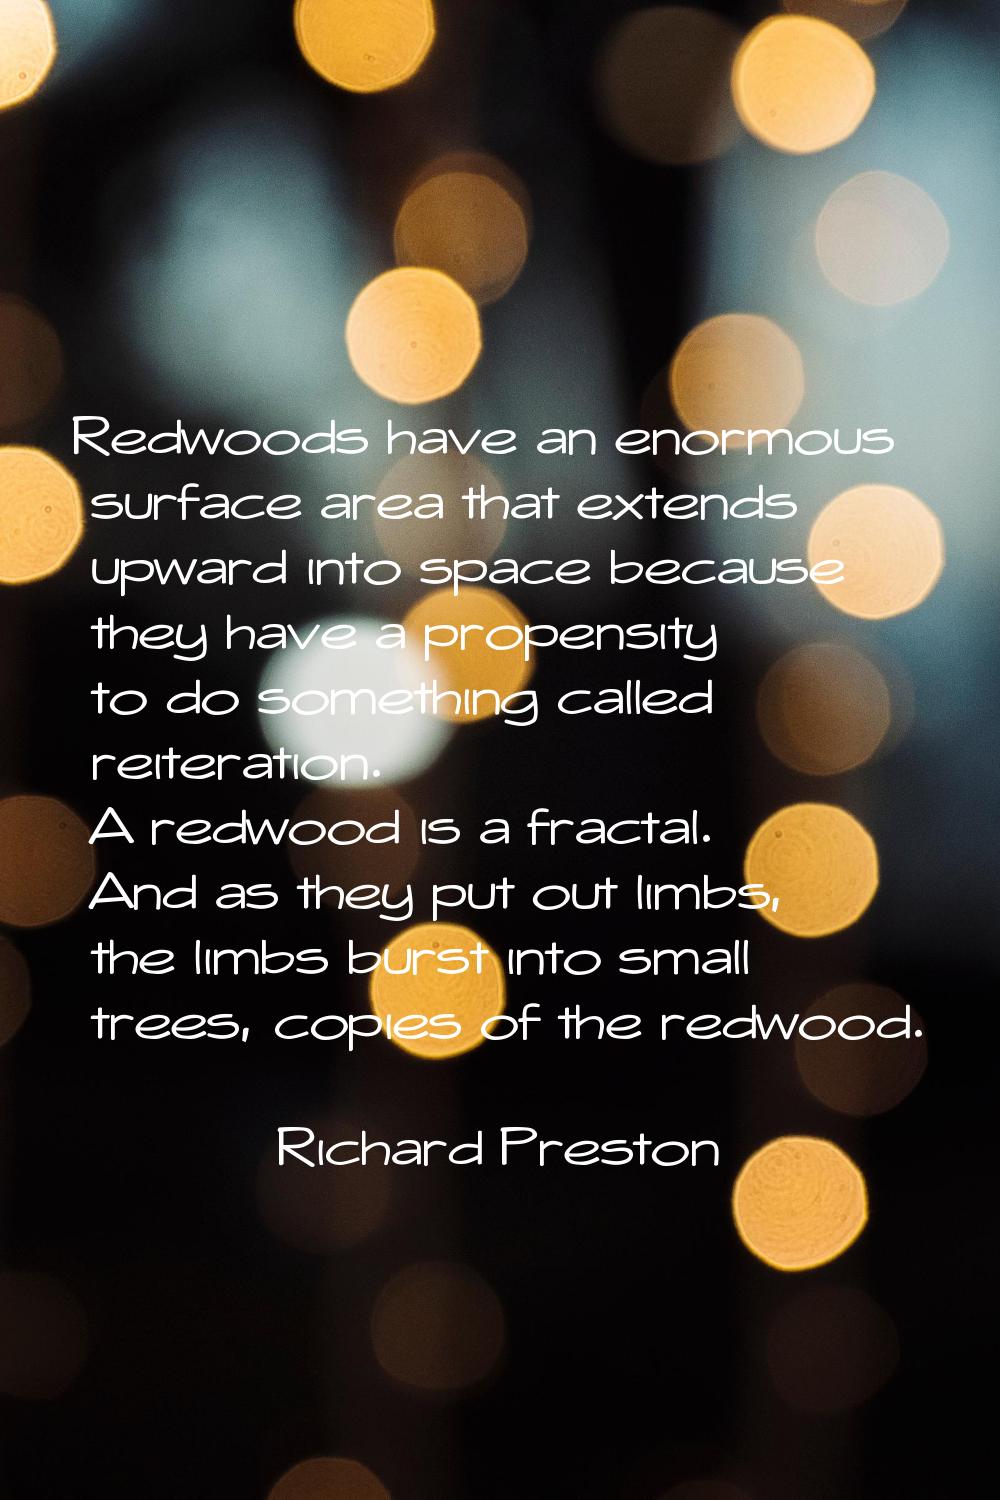 Redwoods have an enormous surface area that extends upward into space because they have a propensit